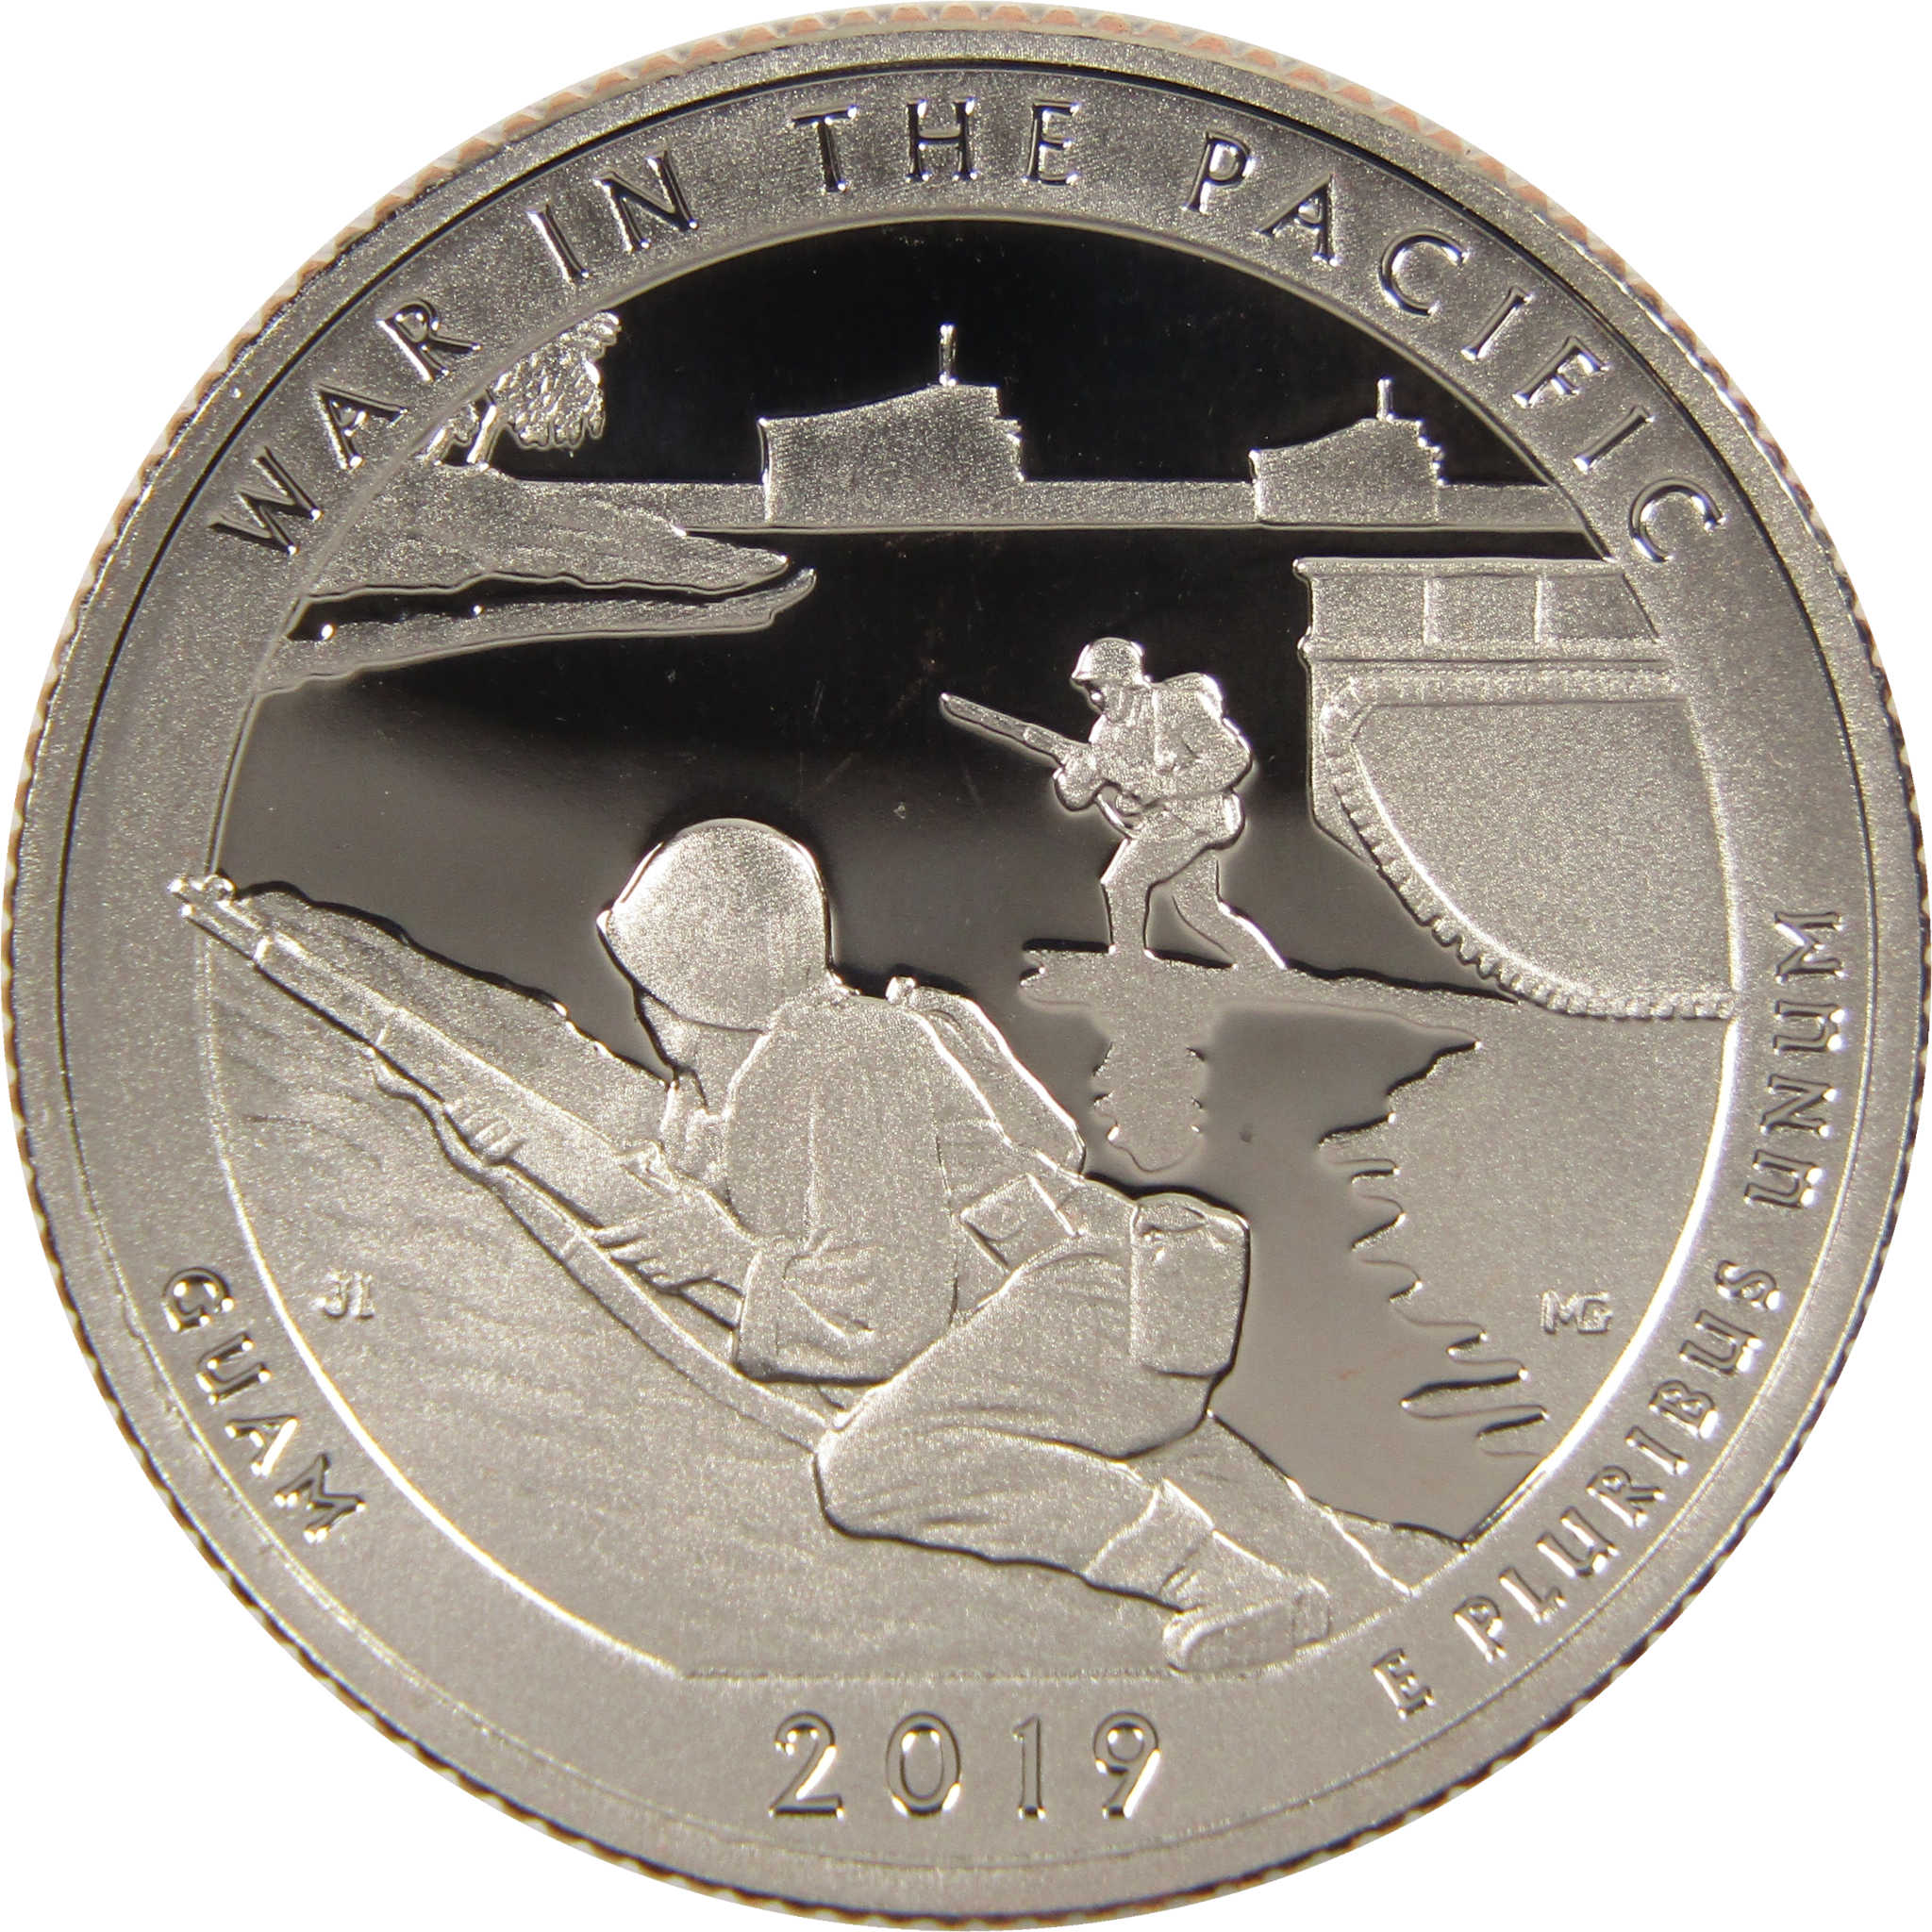 2019 S War in the Pacific NHP National Park Quarter Choice Proof Clad